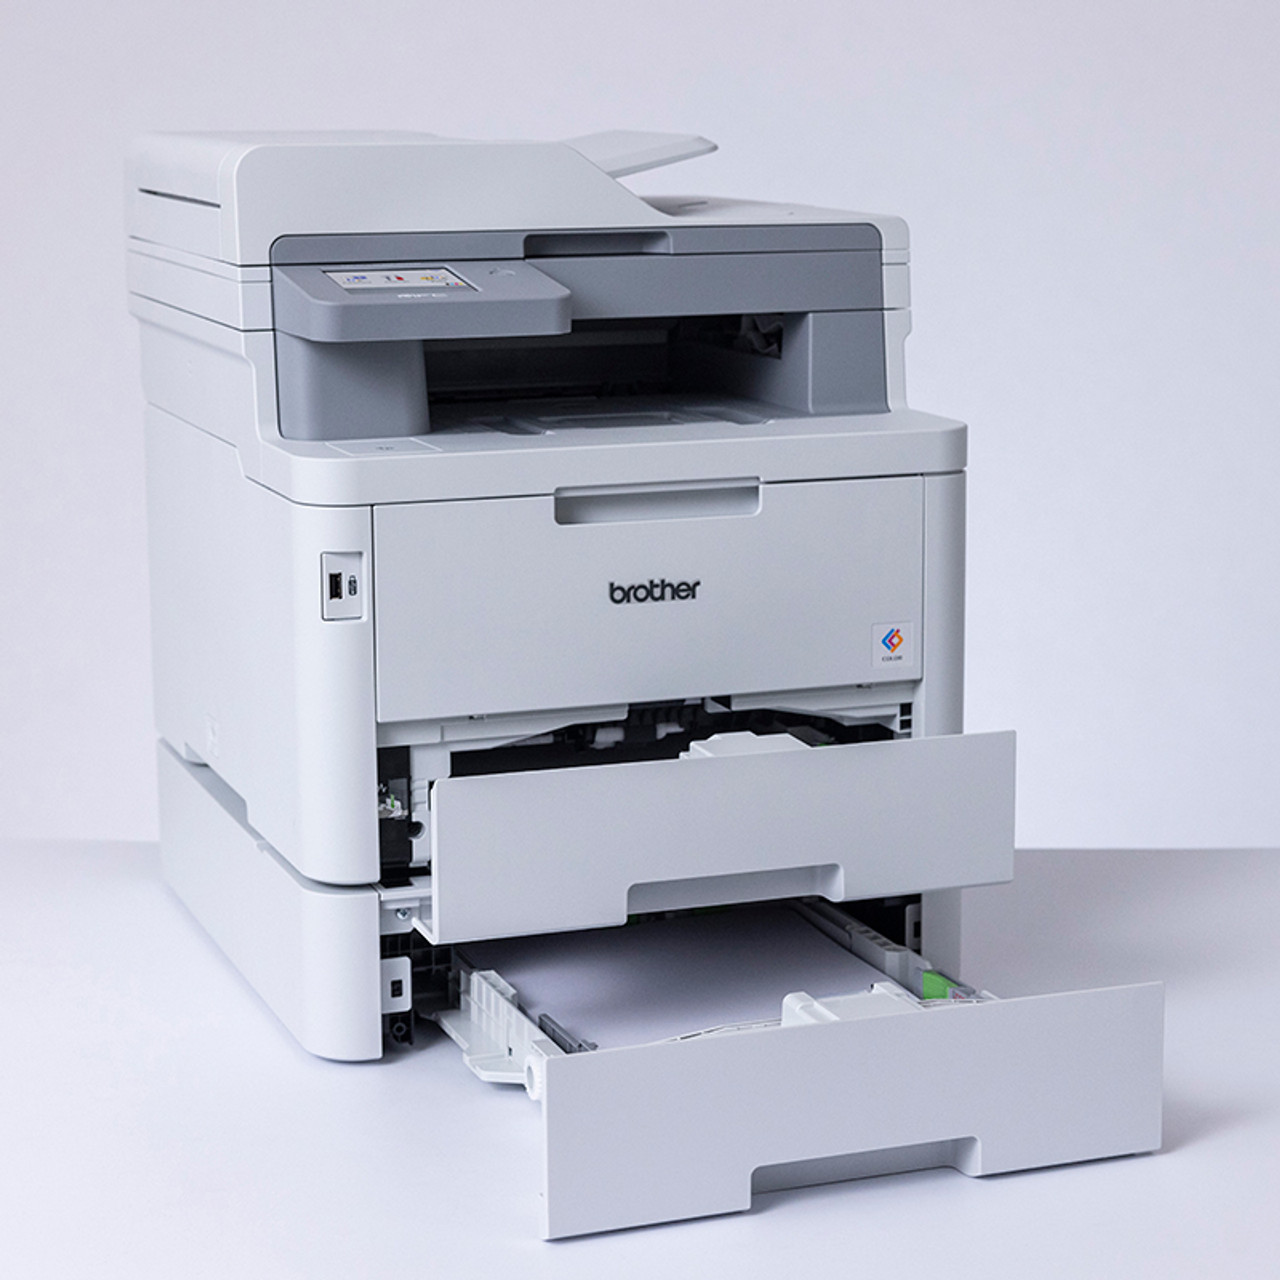 Printers and All-in-Ones - Business Printers - Brother